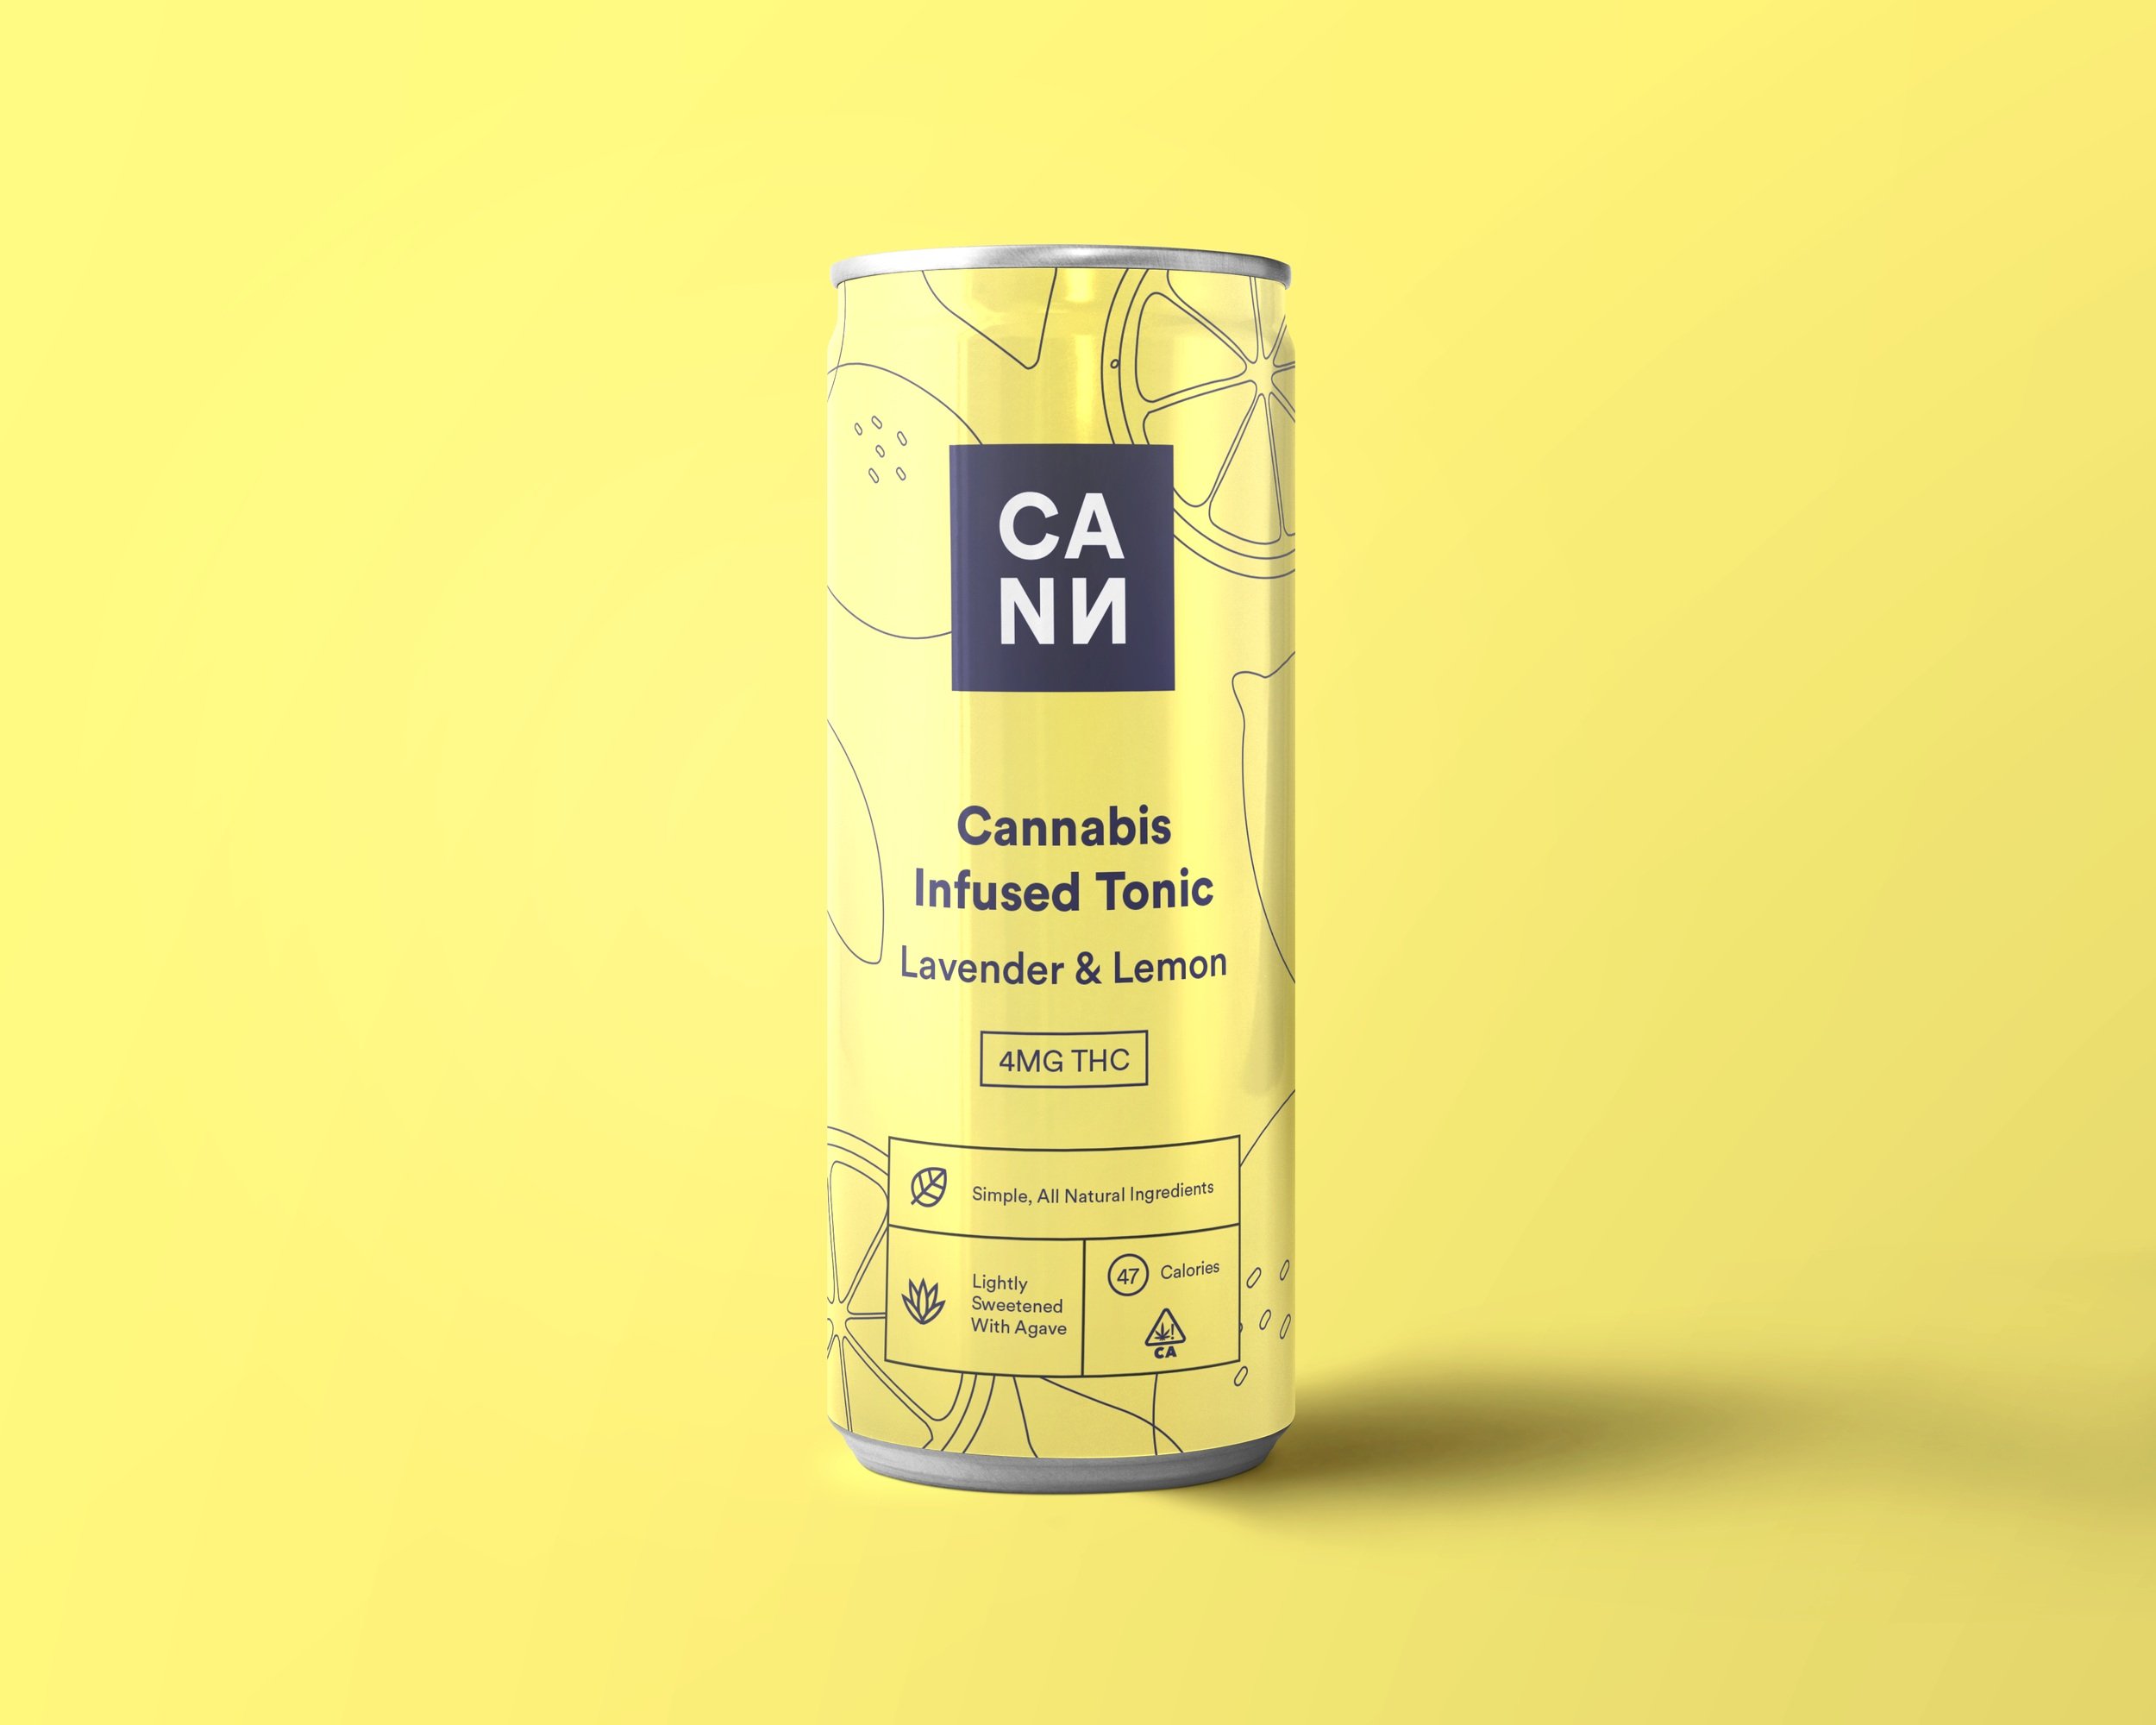 Drink Cann can label design in yellow with line based illustrations and logo design